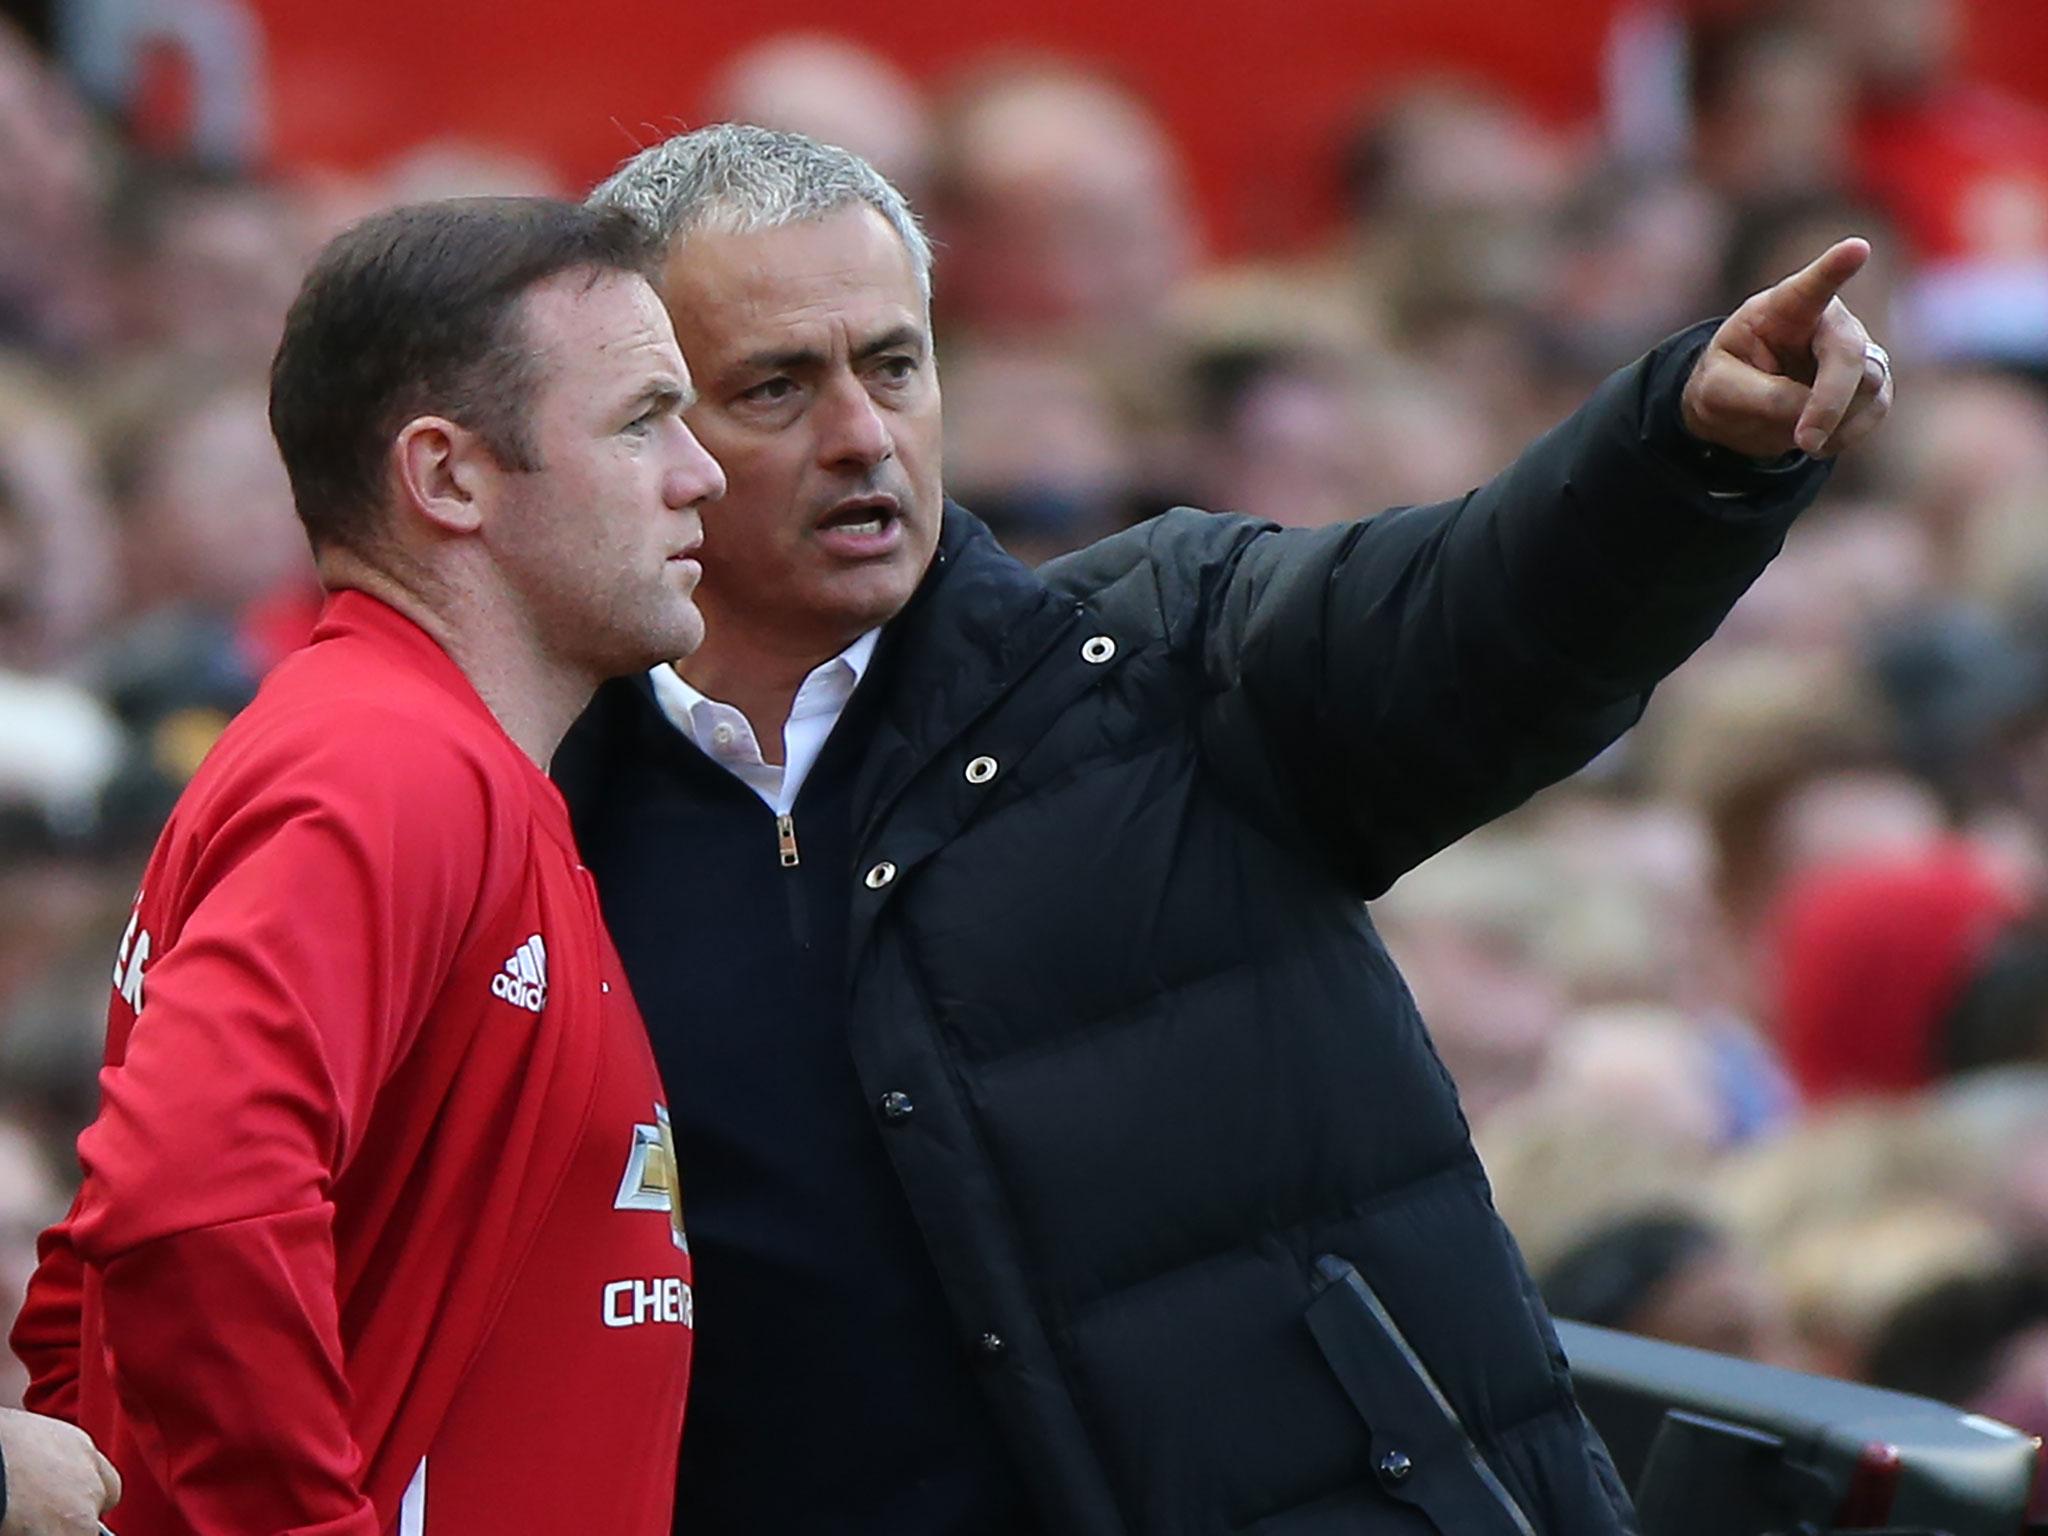 Speaking in his press conference, Mourinho sought to dismiss reports linking Rooney with a return to Goodison Park